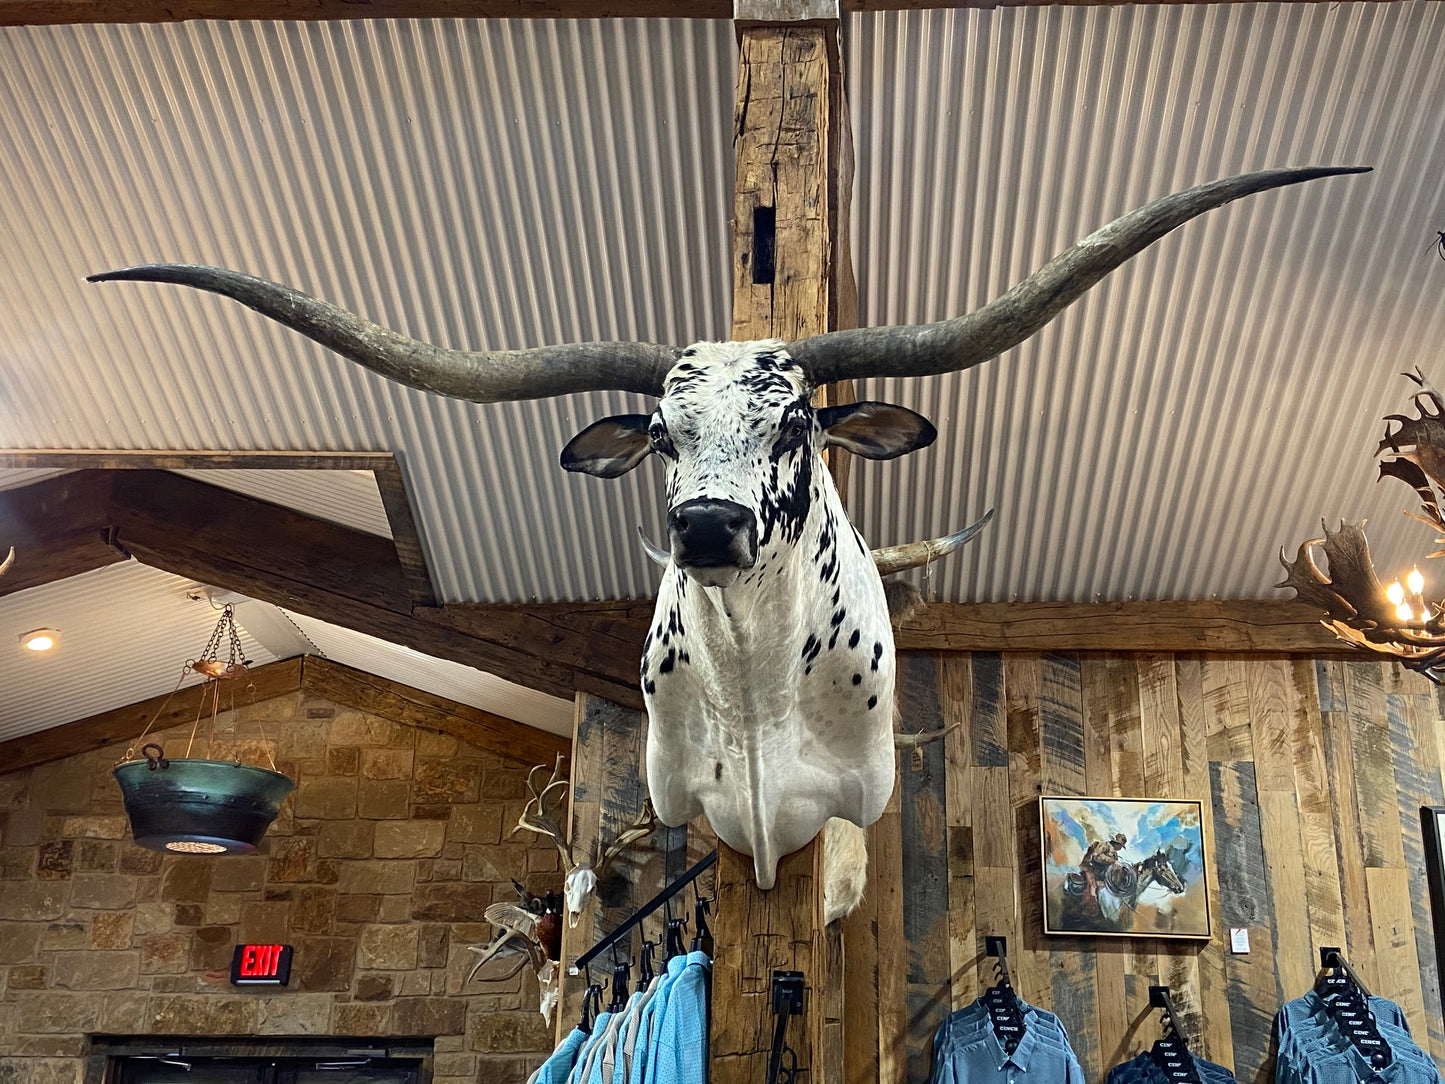 *SOLD*White and black longhorn mount